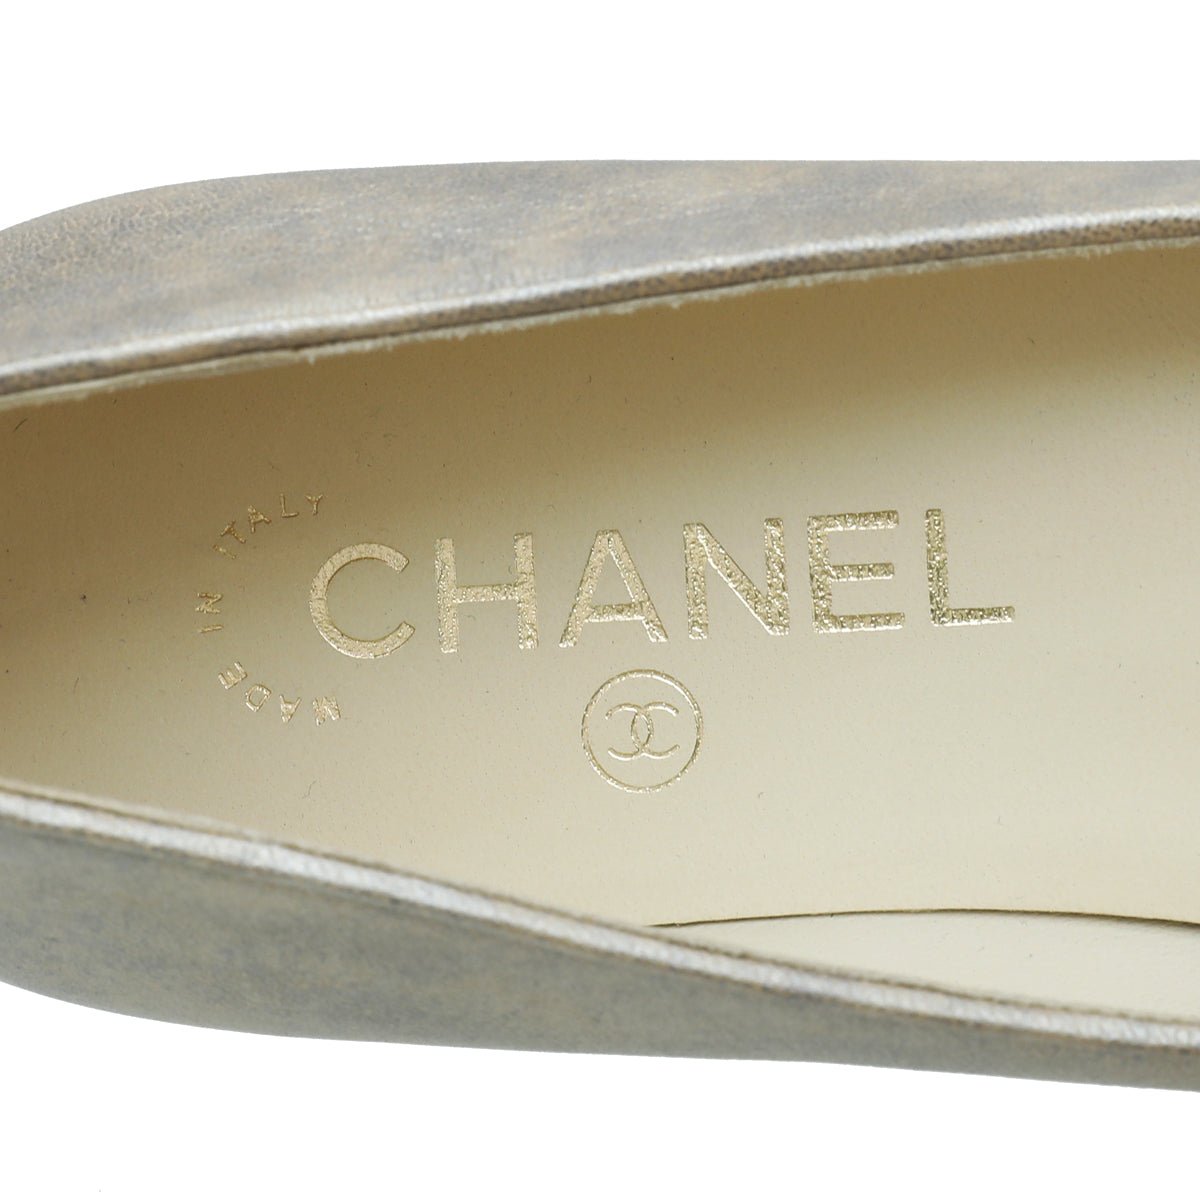 Chanel - Chanel Beige Camellia Pearl Ballet Flats 37.5 | The Closet